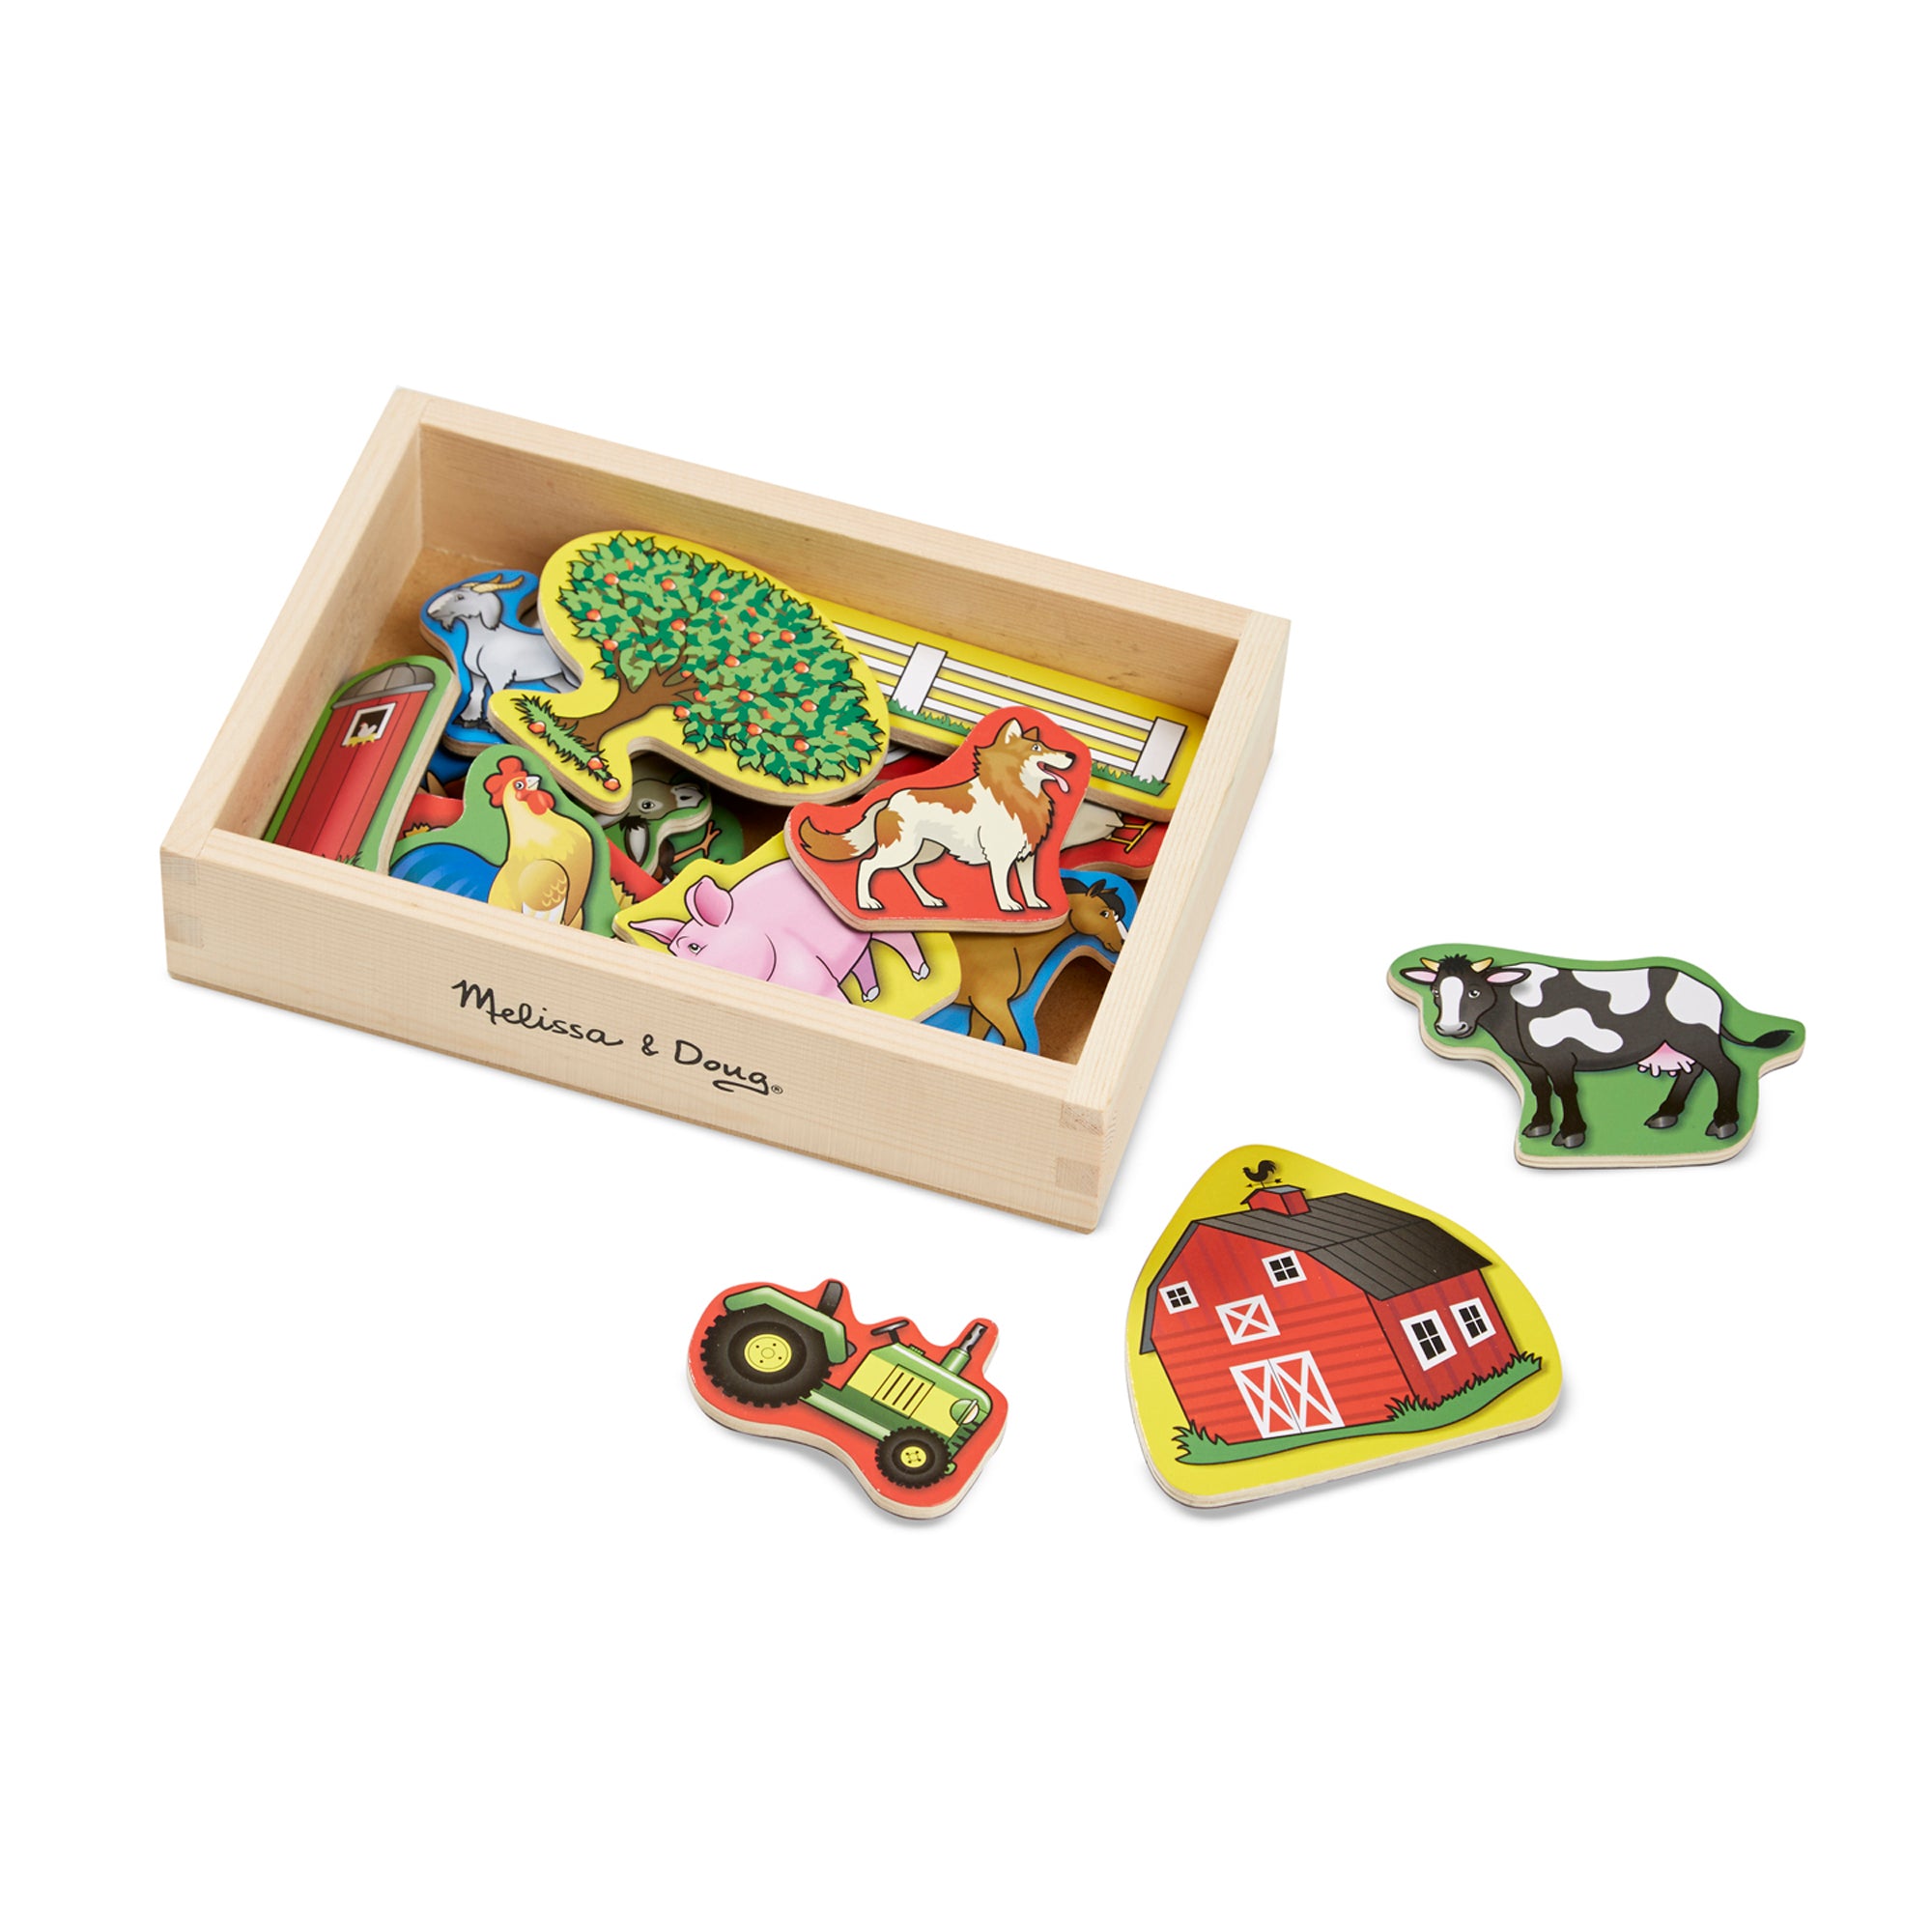 Melissa and Doug Wooden Farm Magnets